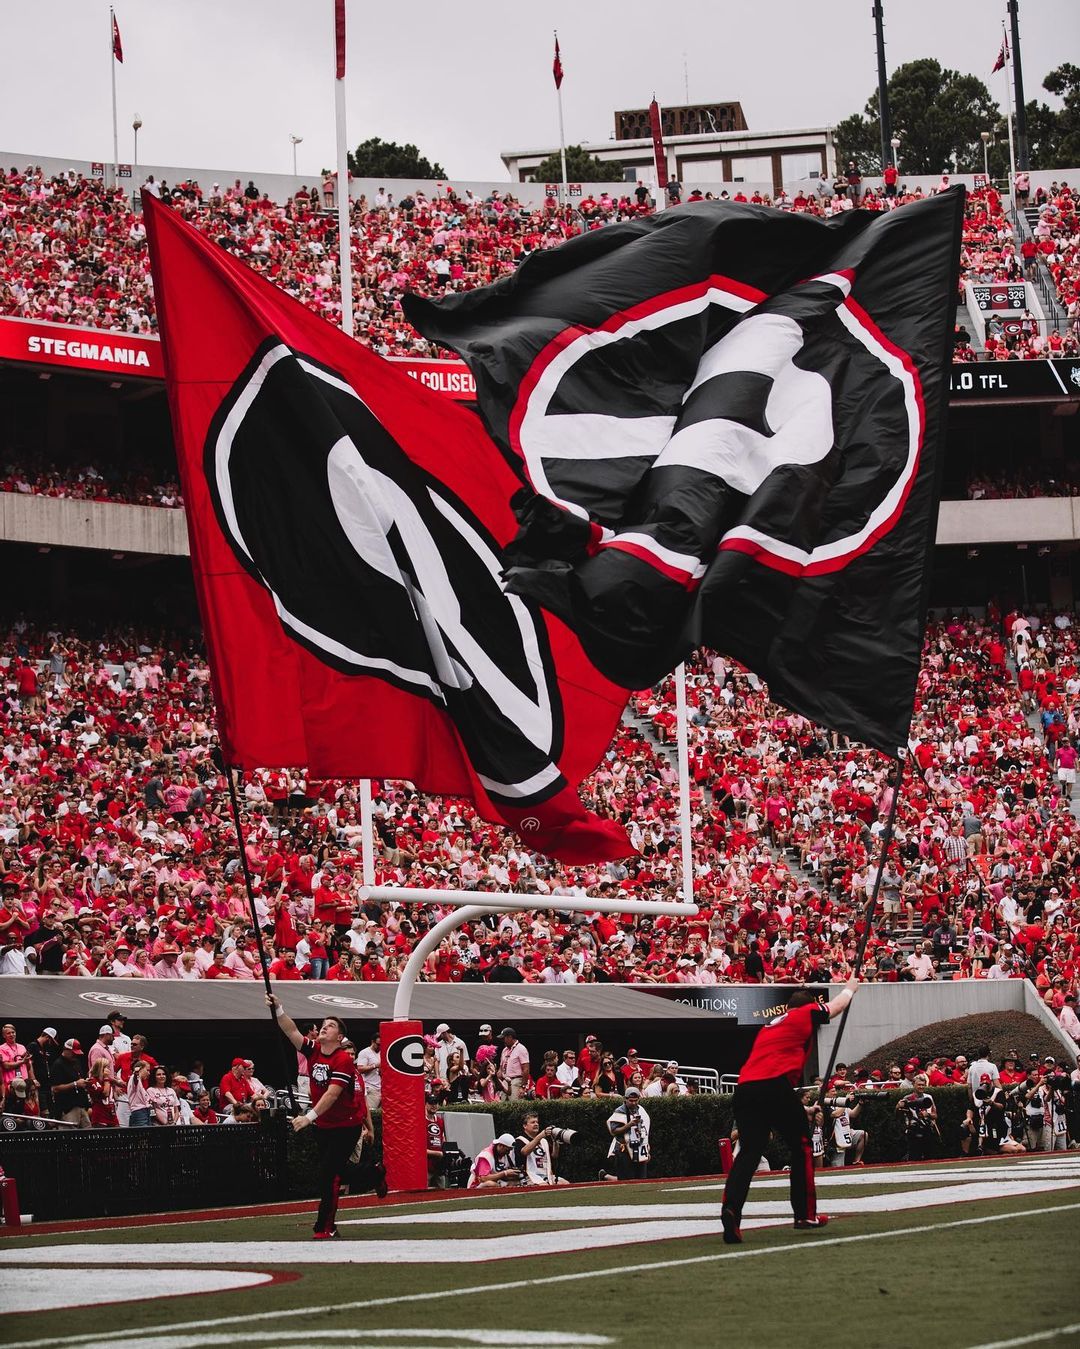 UGA Cheerleaders Running in the Endzone with Large G Flags. Photo by Instagram user @georgiafootball